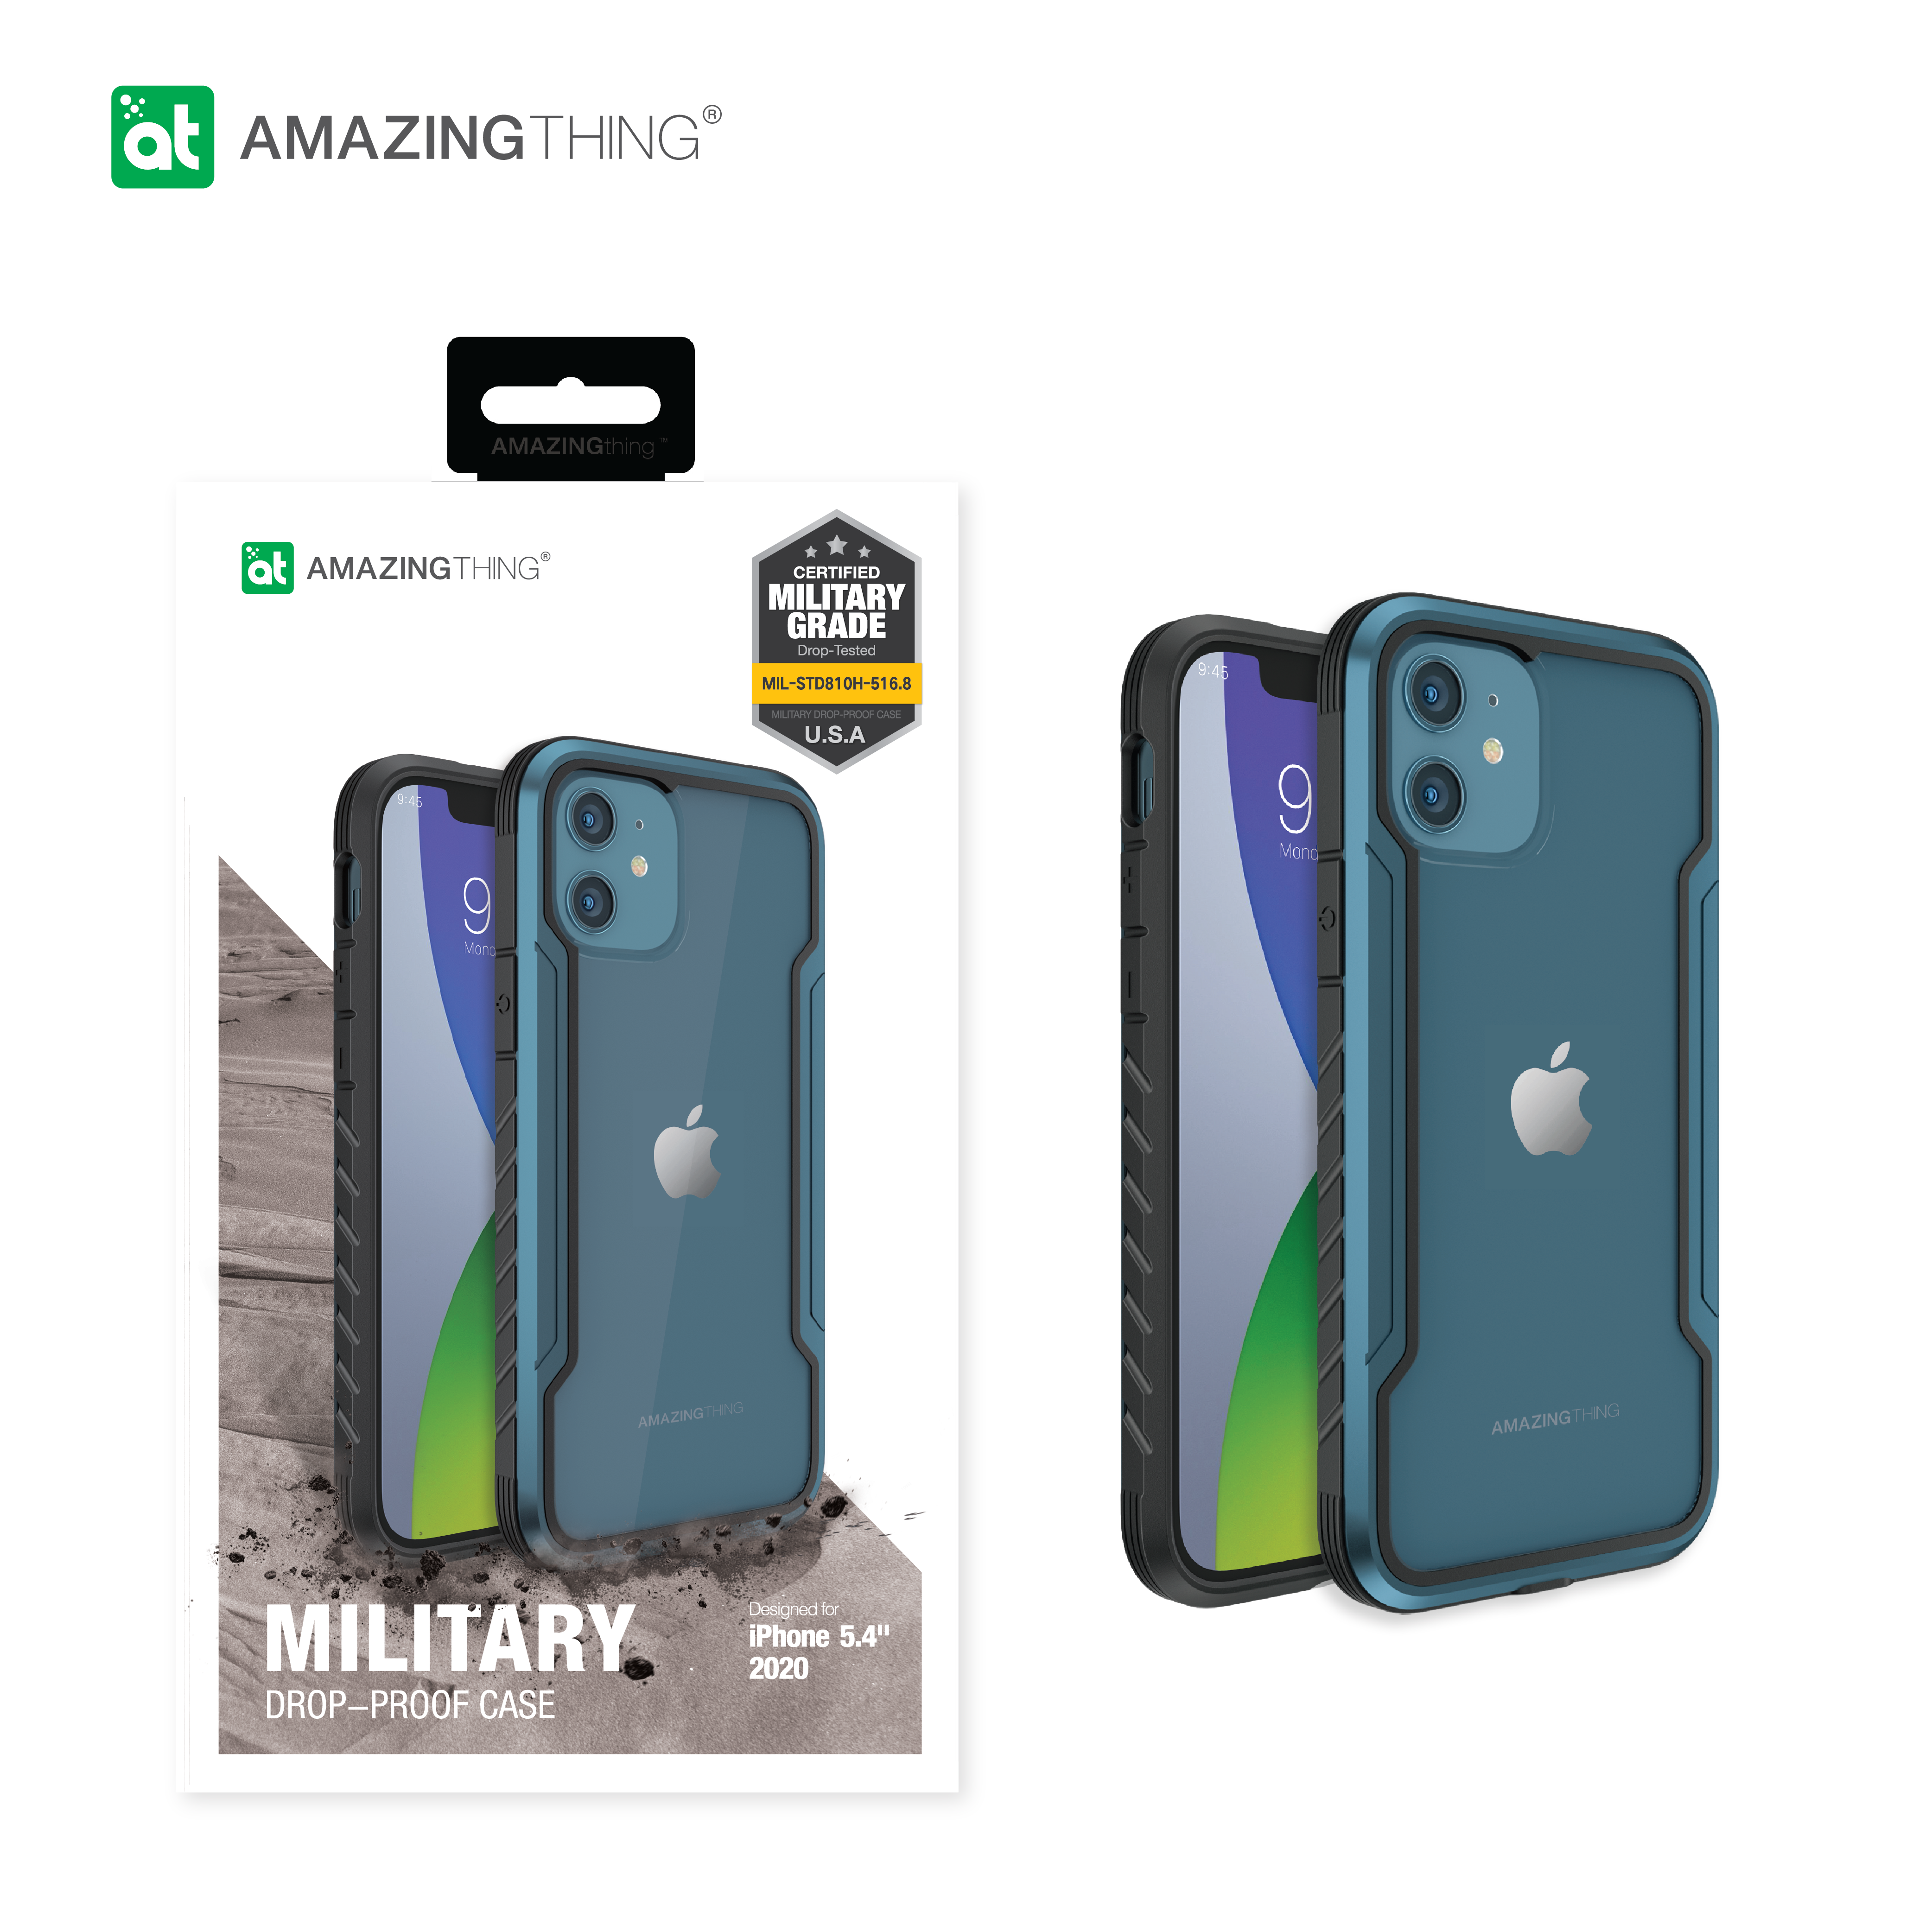 AMAZINGthing Military Drop Proof Case for iPhone 12 Mini - TECH STREET